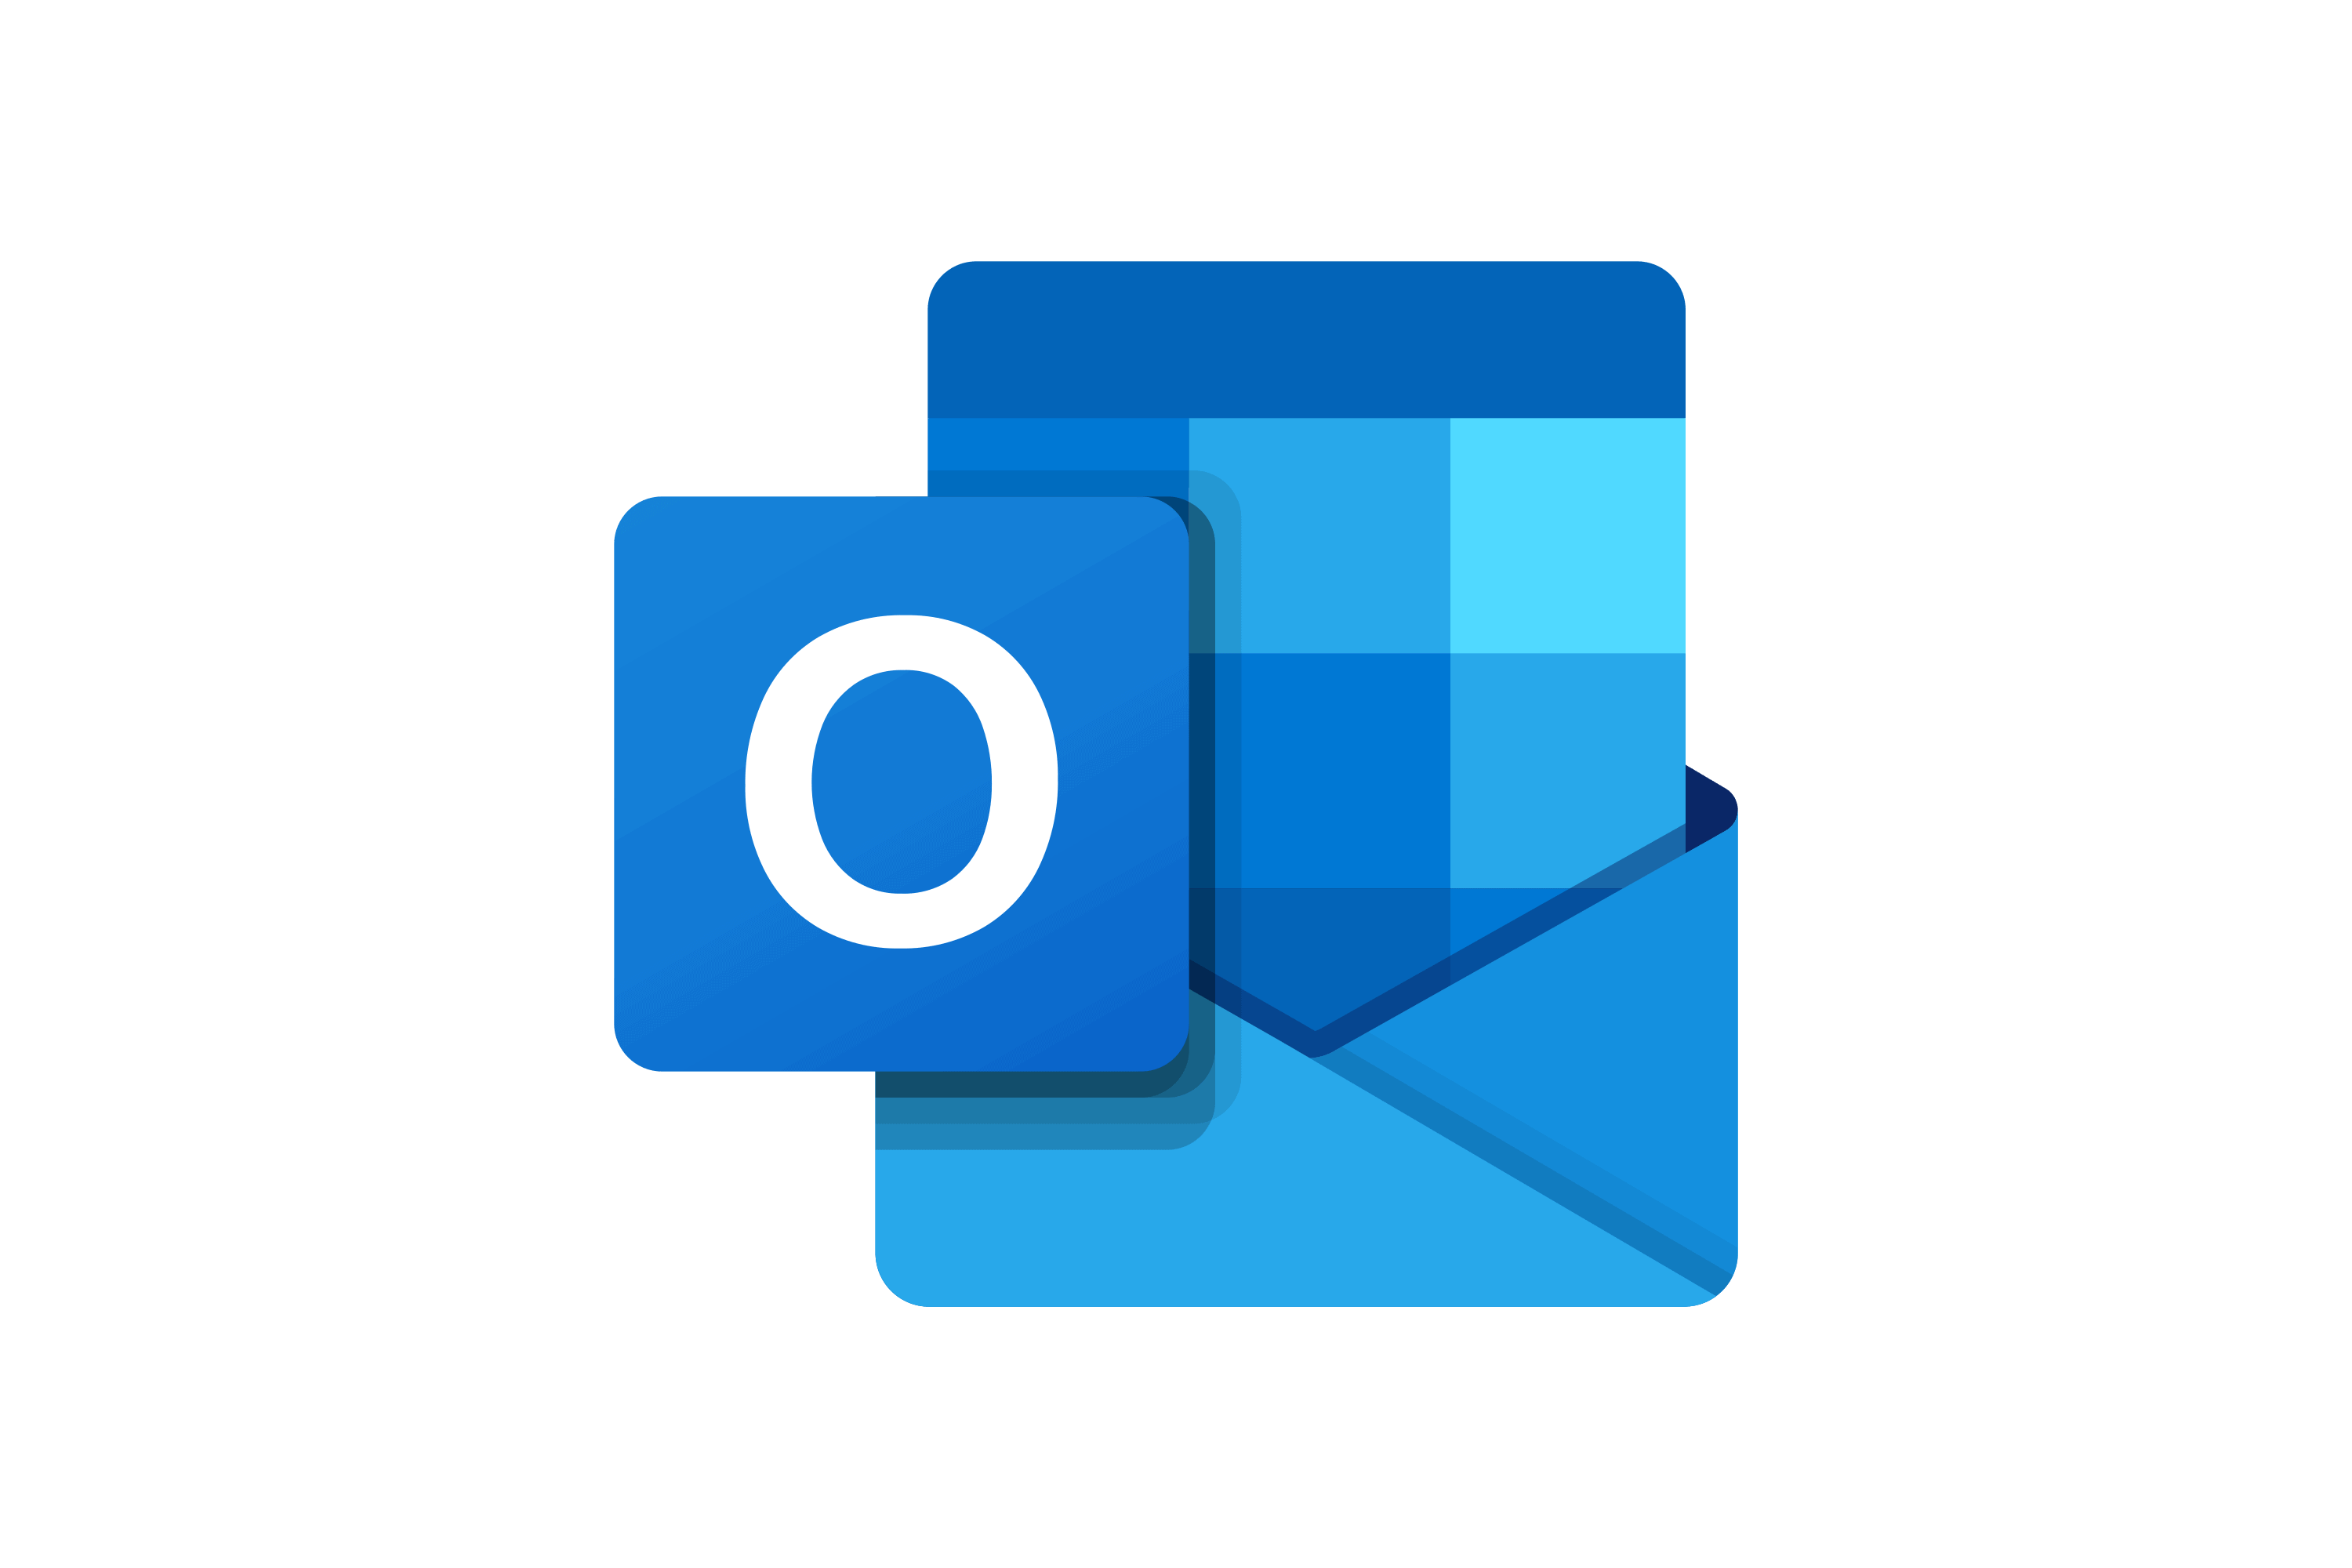 Microsoft Outlook for Android updated with new feature